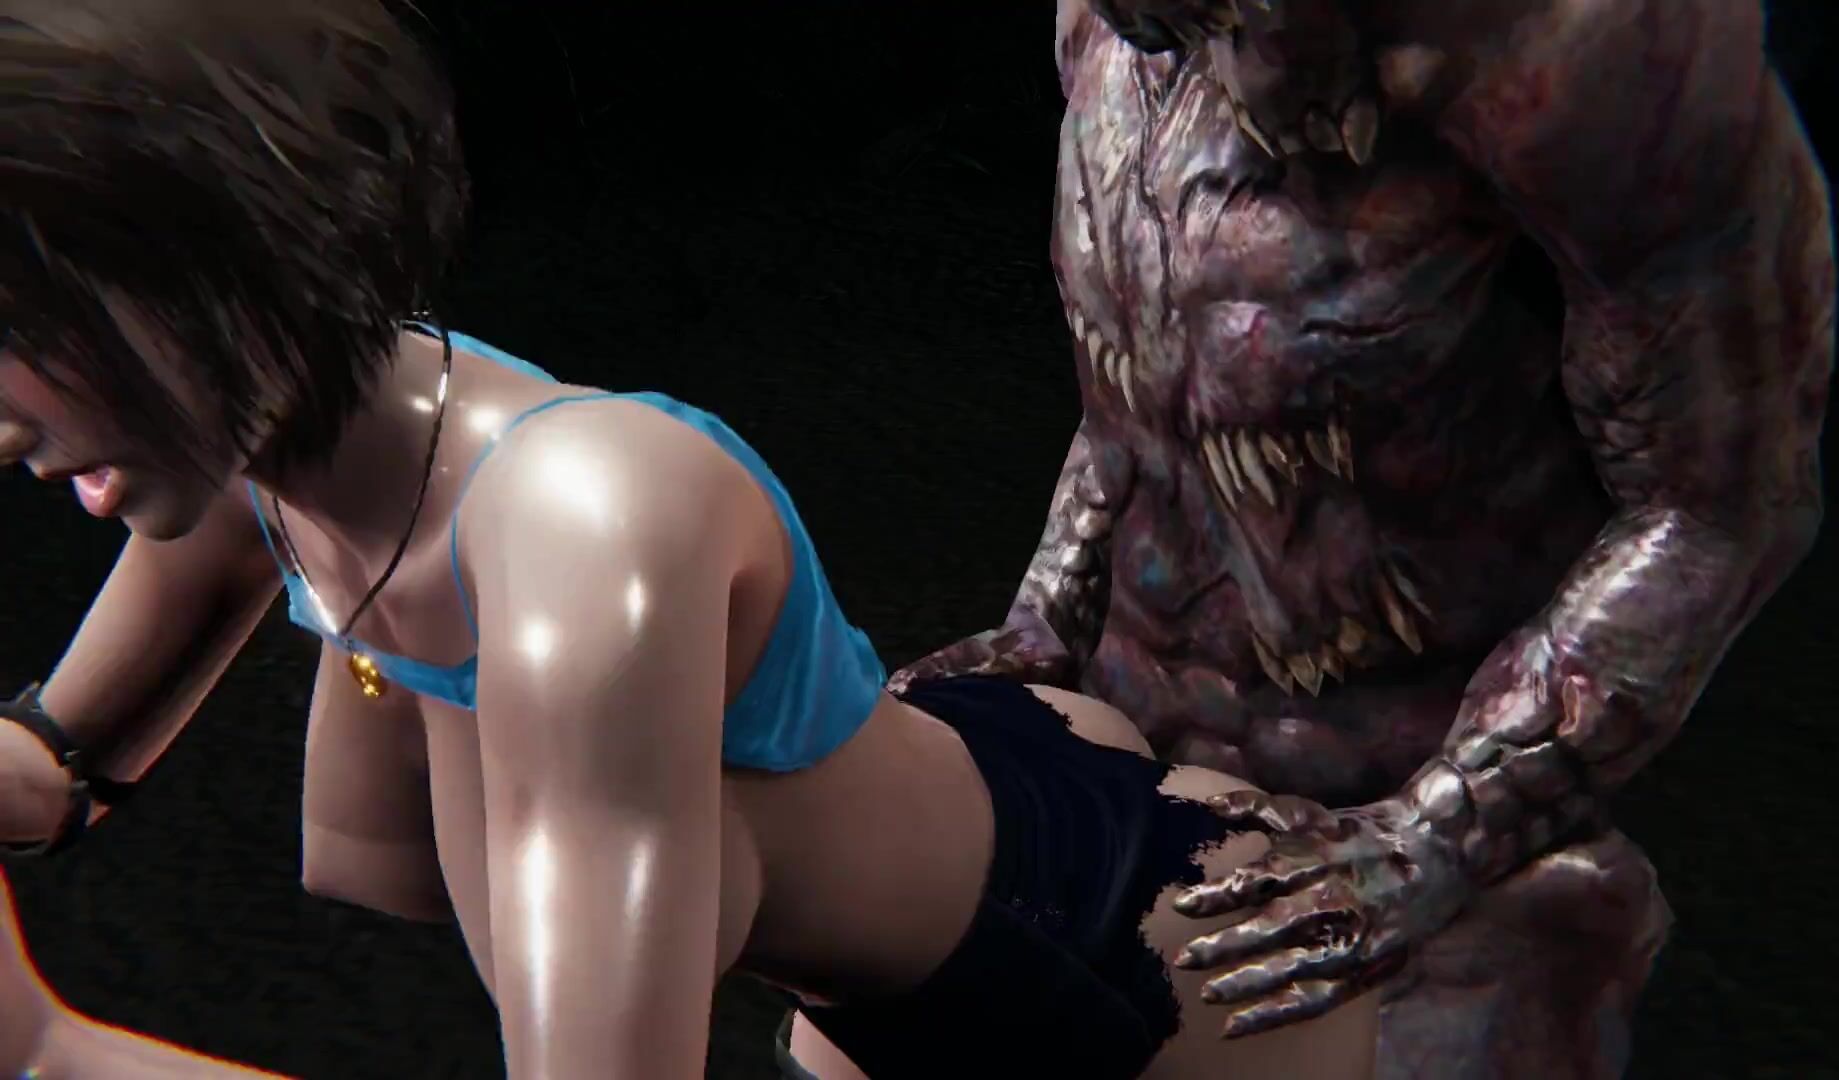 Anime Sexy Zombie - Jill Valentine Resident Evil Anal Zombie Fuck and Deepthroat, ATM,  Squirting 3D Hentai watch online